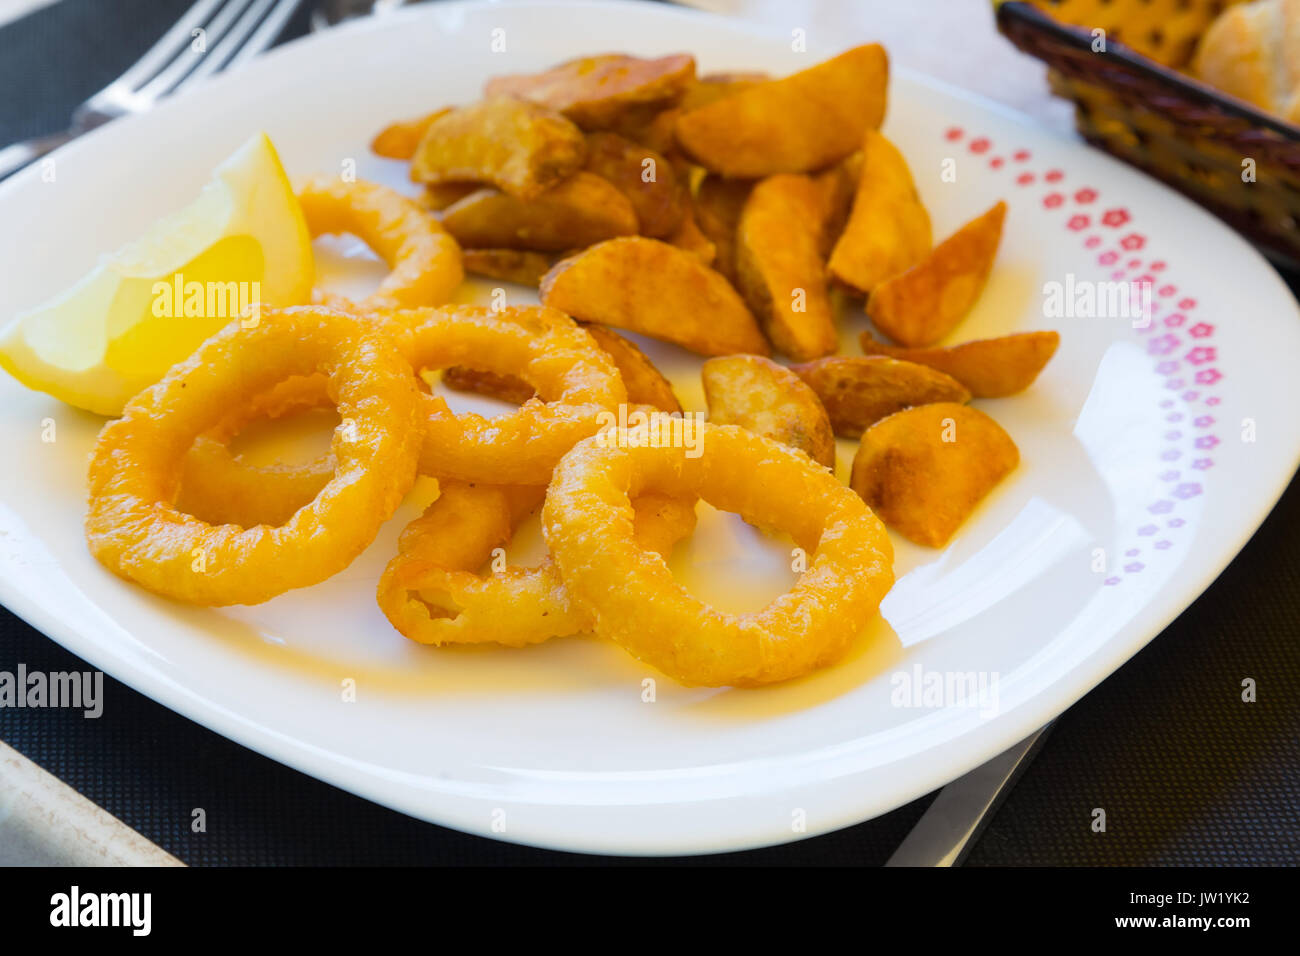 Calamares a La Romana Fried Squid   on  plate at  table Stock Photo